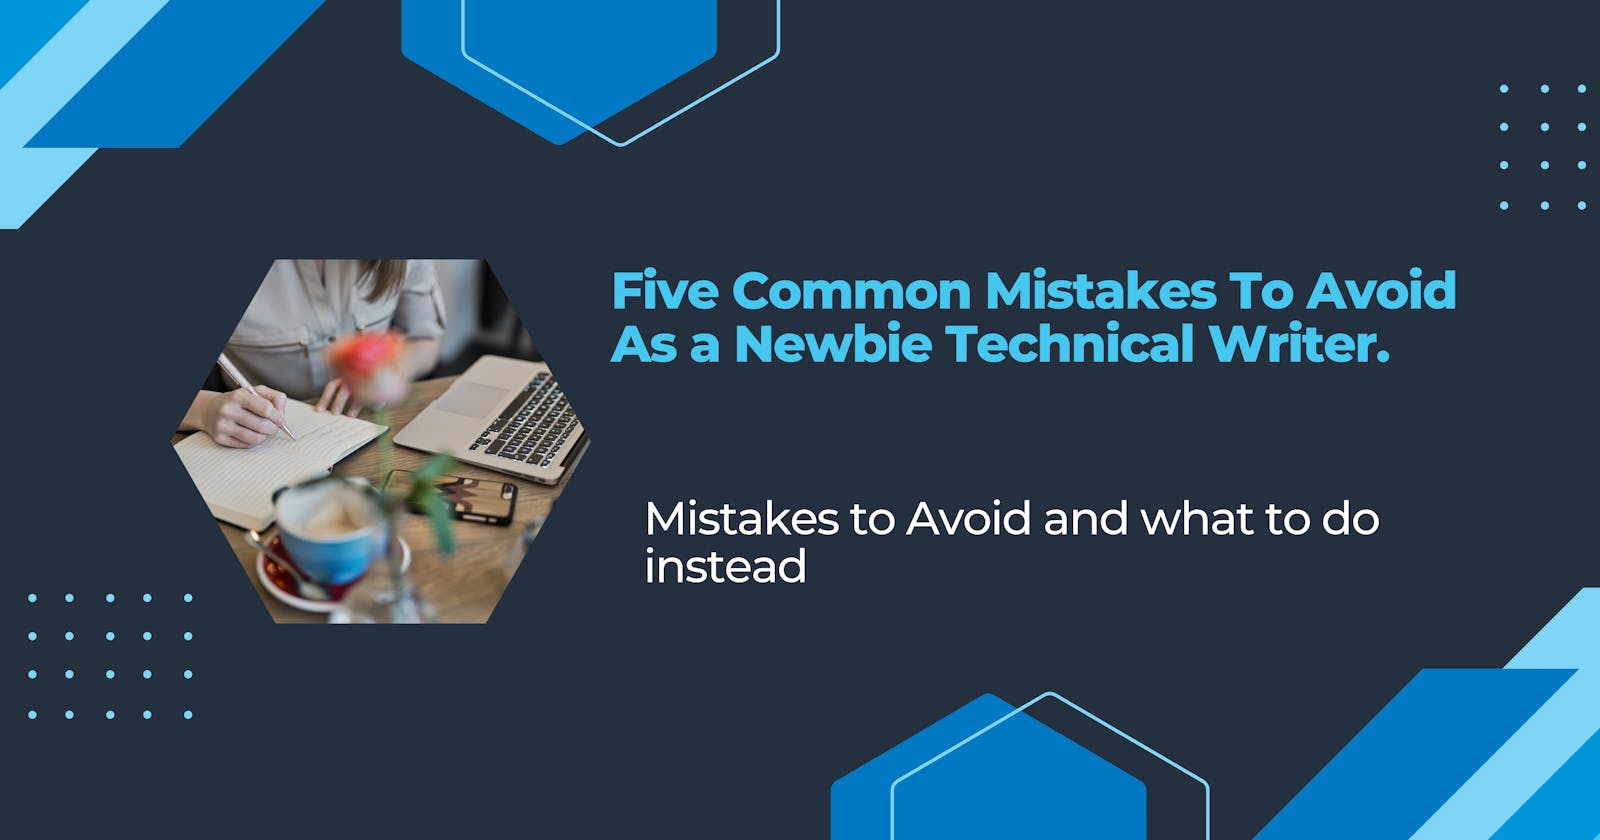 Five Common Mistakes To Avoid As a Newbie Technical Writer.